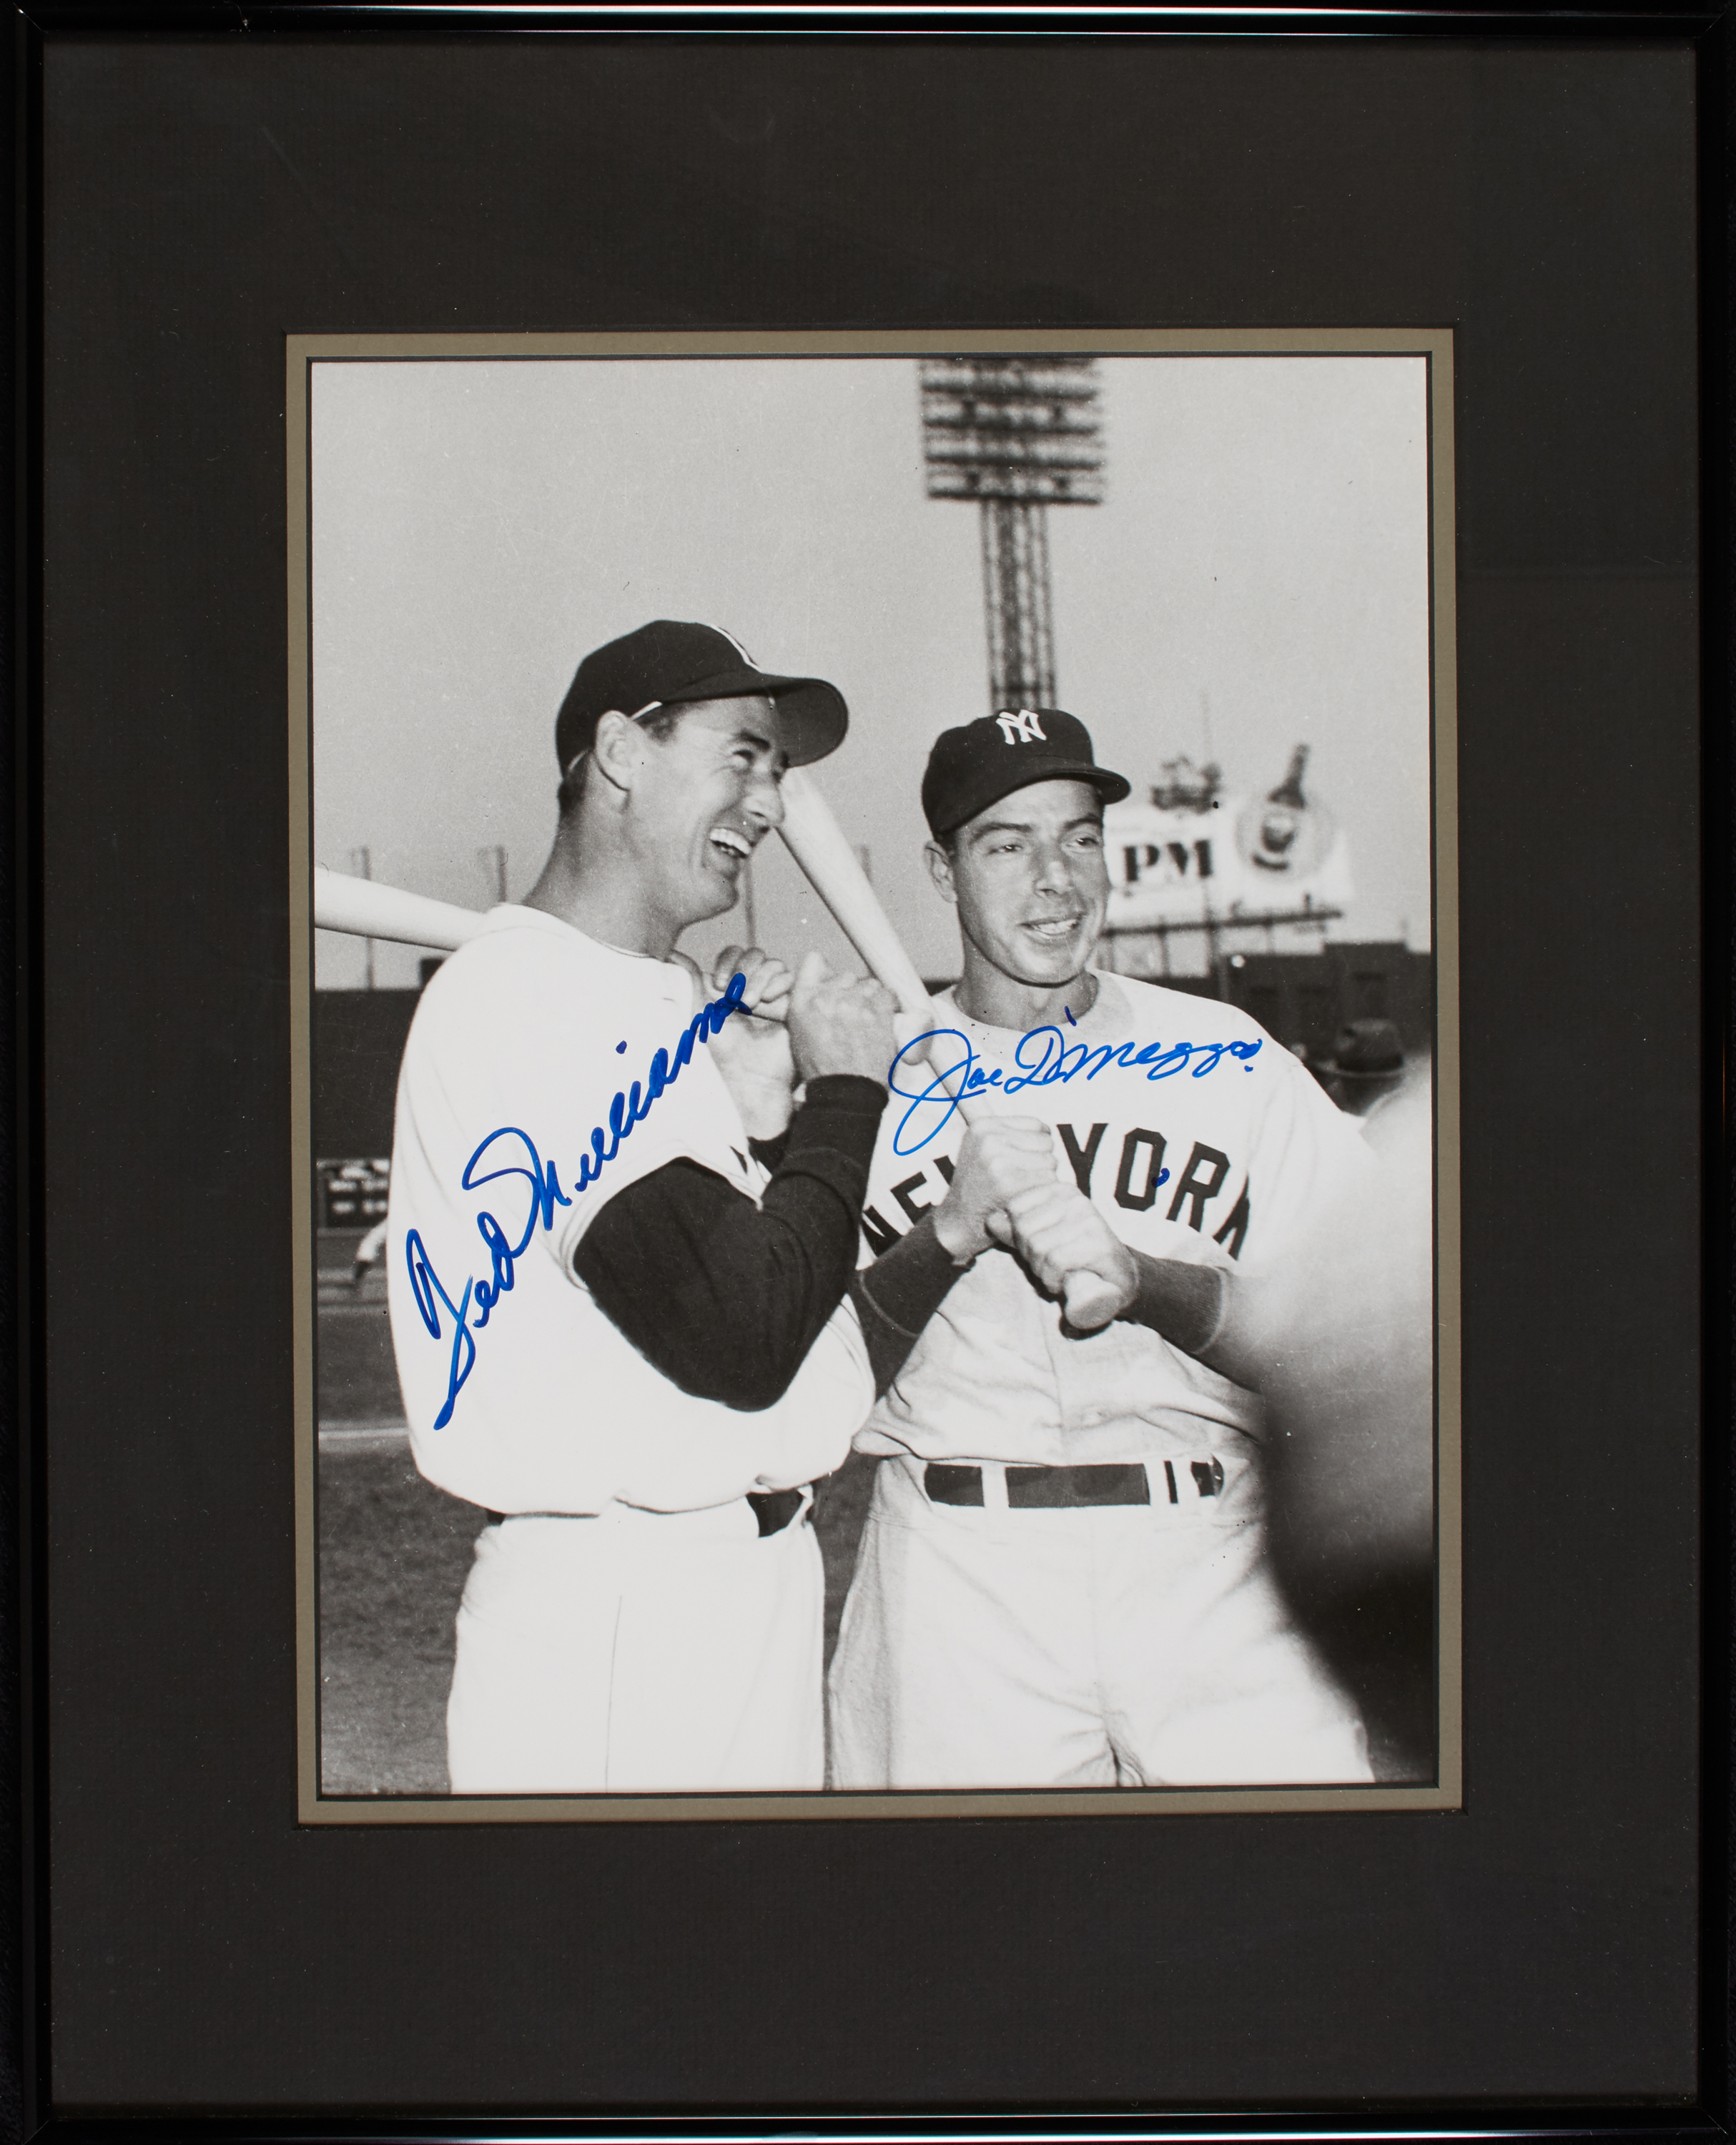 Joe DiMaggio and Ted Williams Signed Photograph